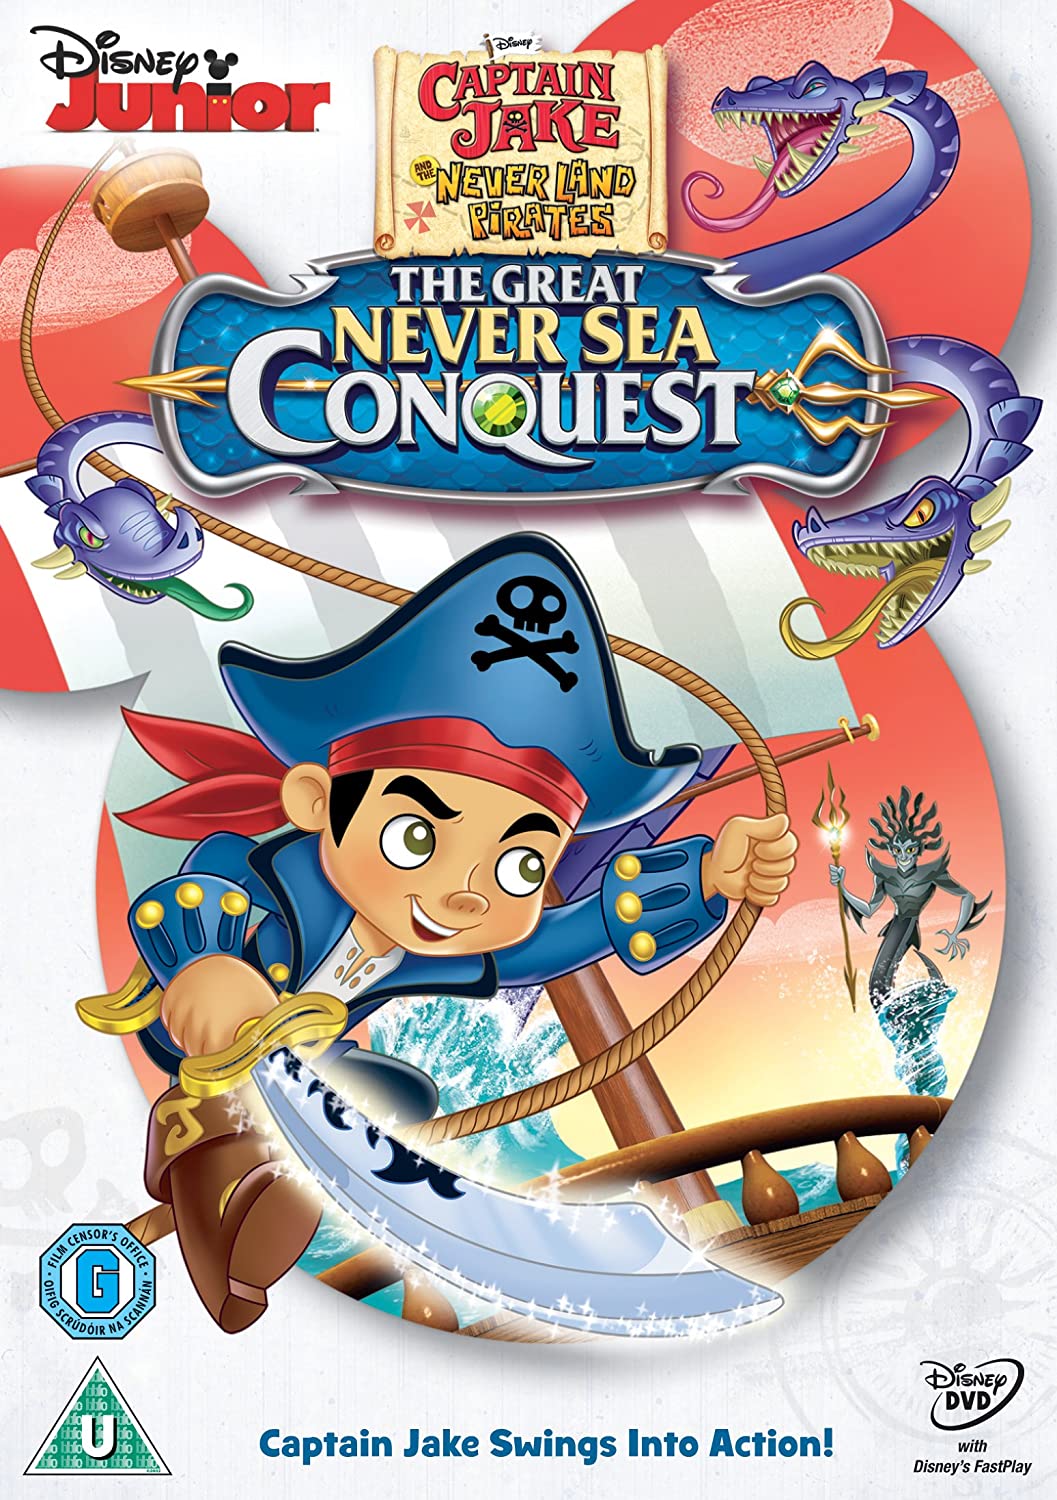 Captain Jake and the Never Land Pirates: The Great ever Sea Conquest - Animation [DVD]